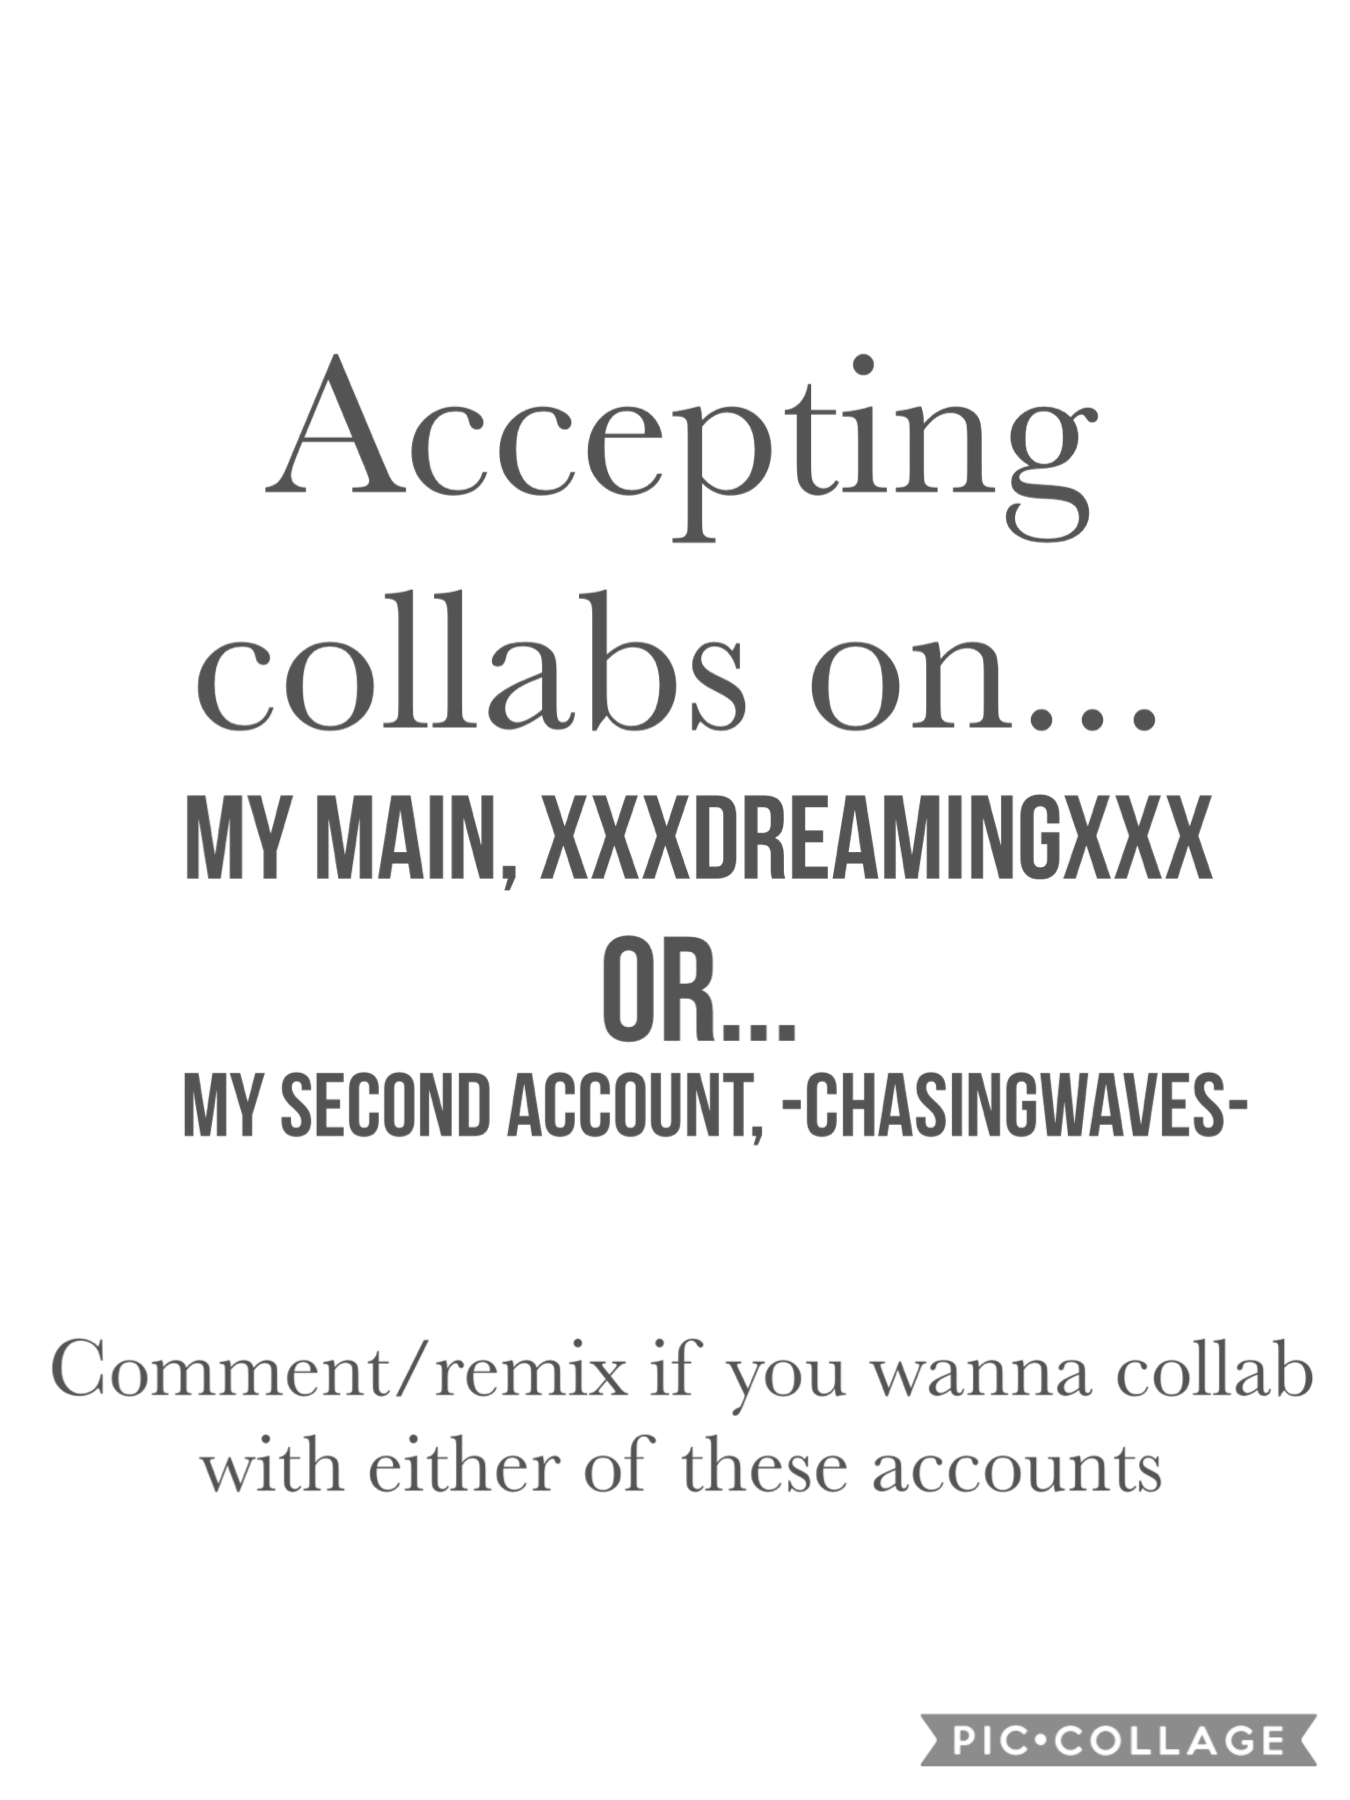 I do not like the layout, but whatever 😌 comment or remix if you wanna collab with either if these accounts and be sure to let me know which one you want me to post it on